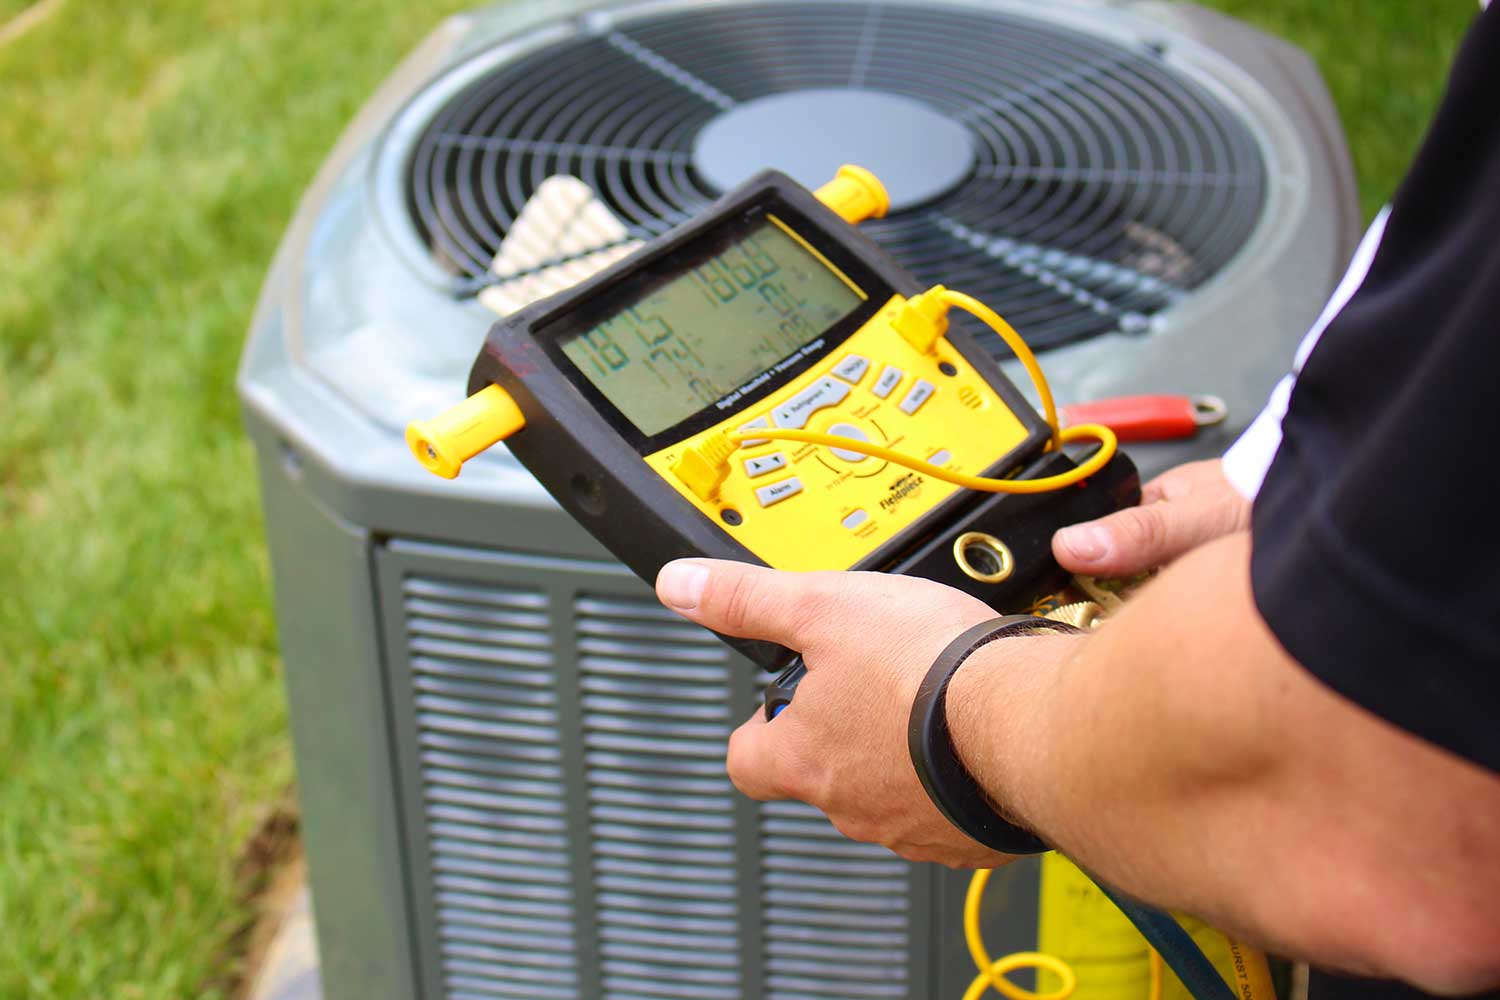 Lowering utility bills by talking with my local Heating, Ventilation, and A/C business